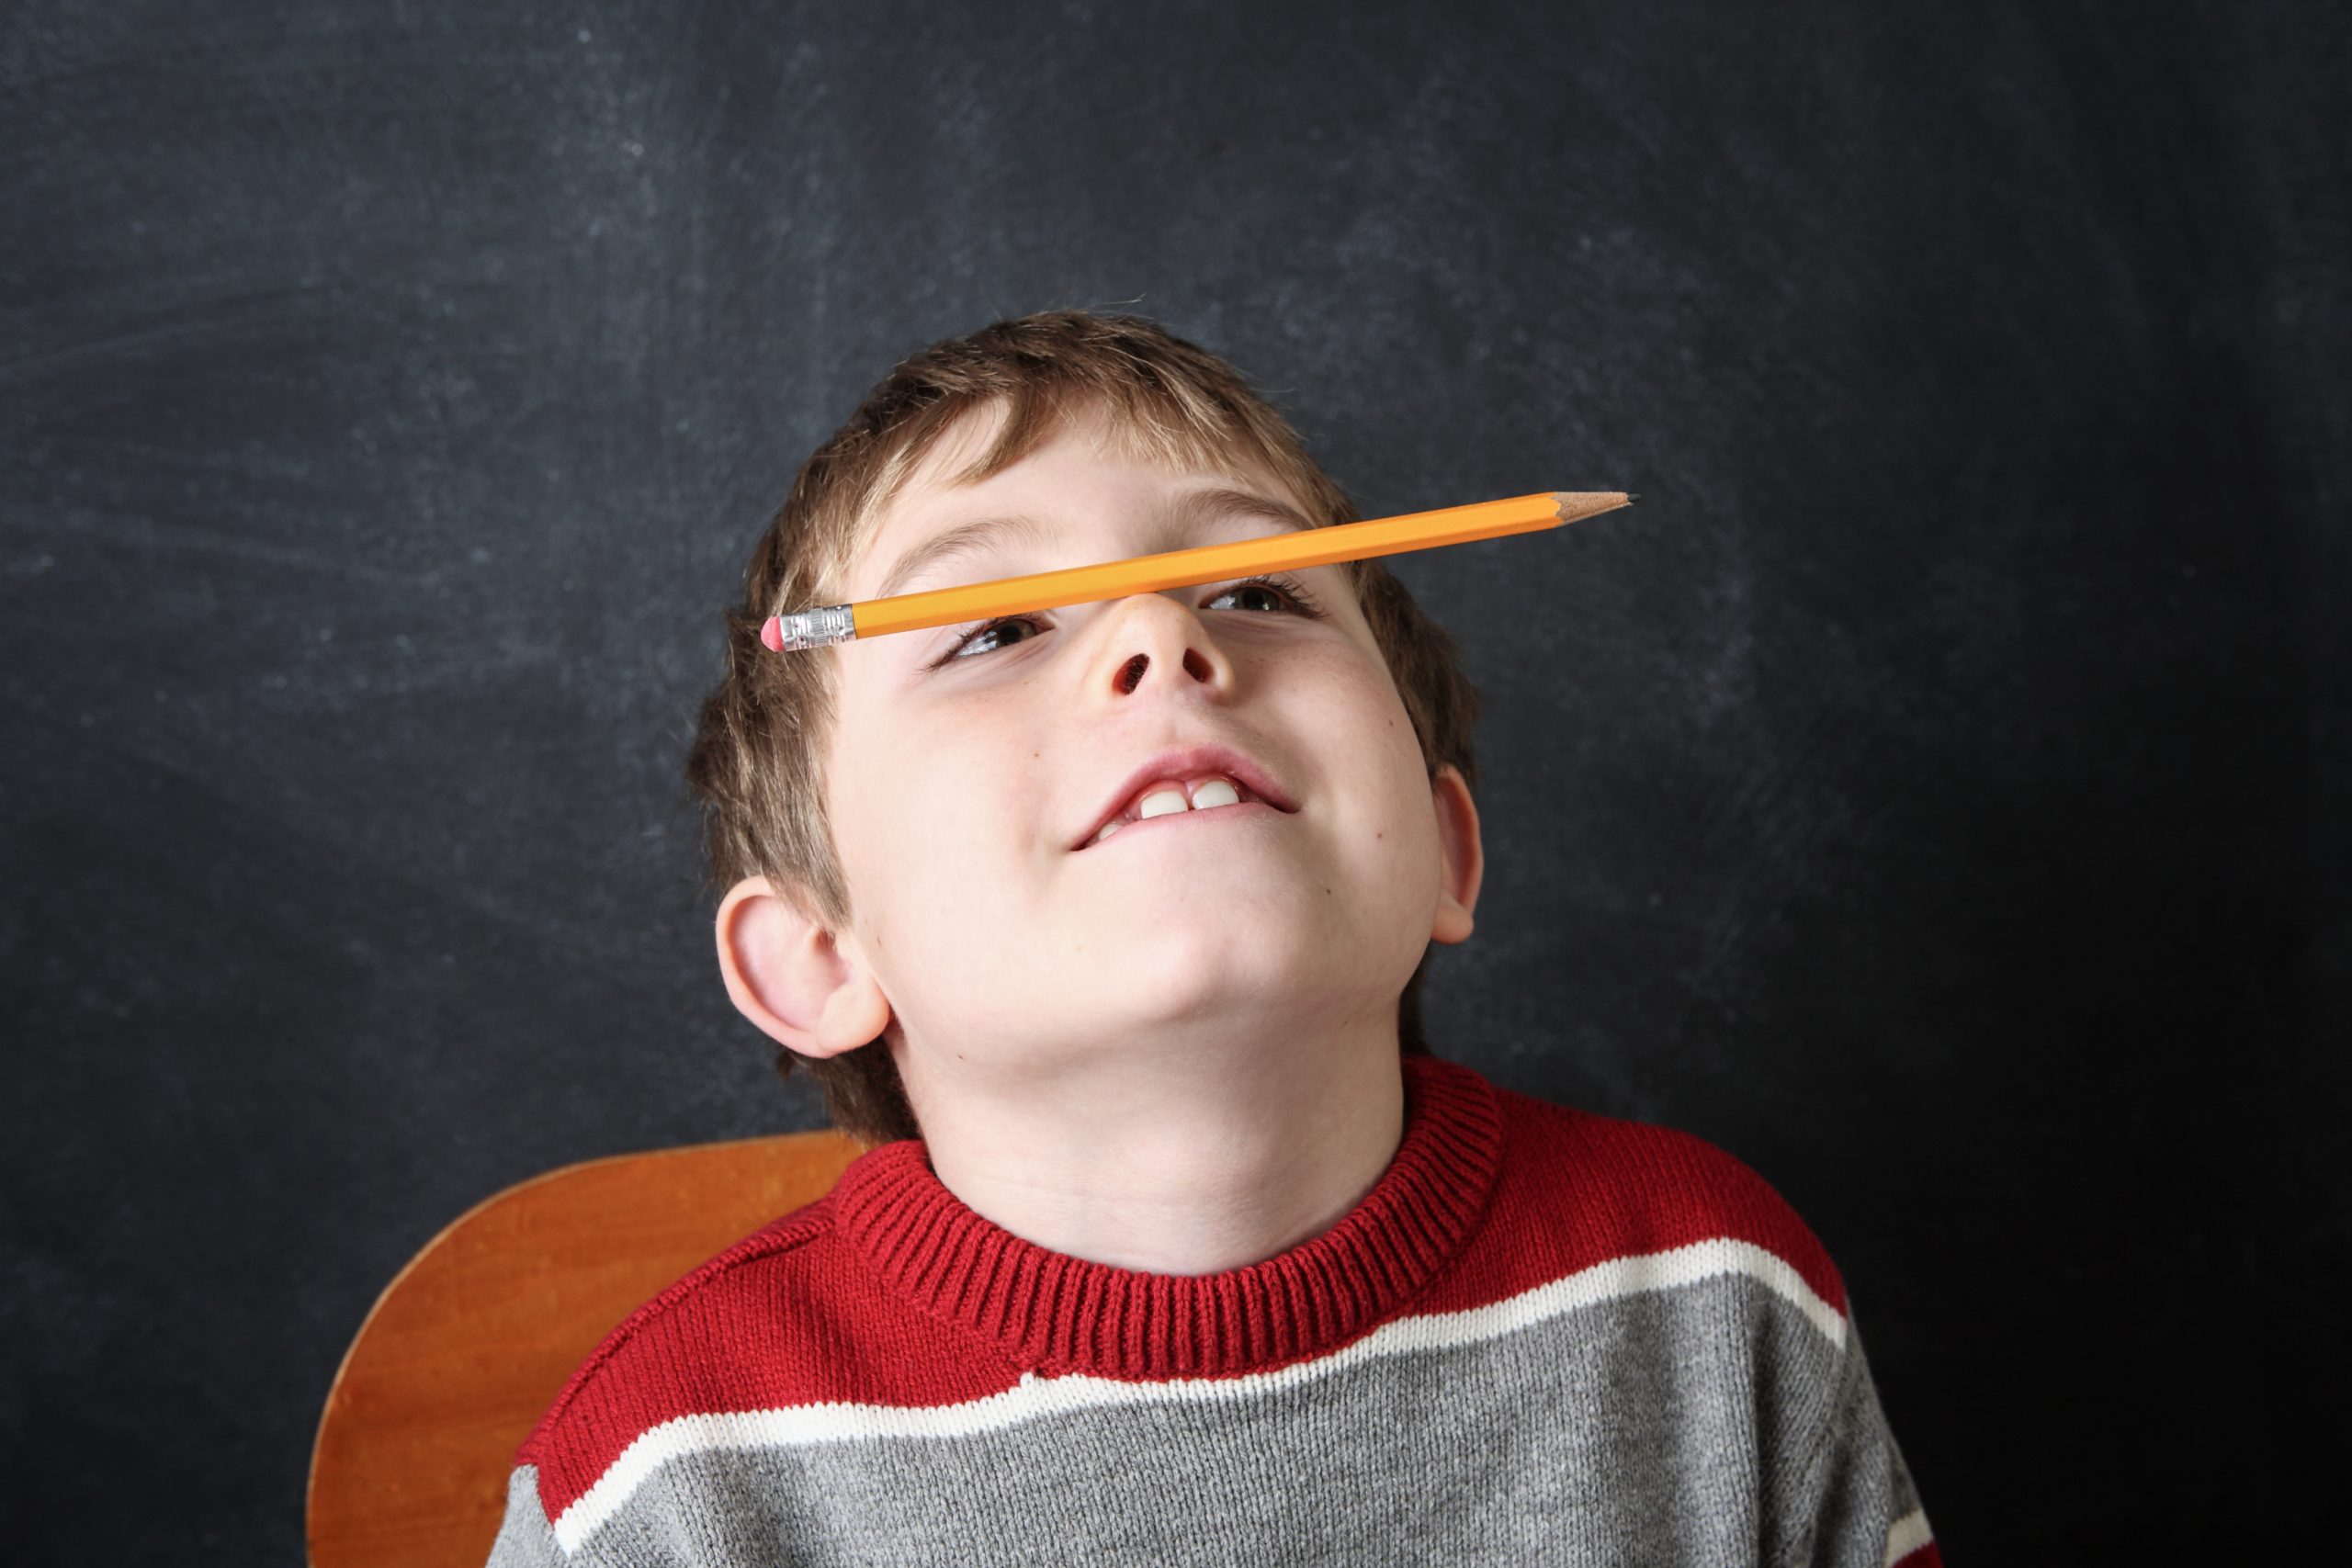 What are the signs of ADHD in a child?